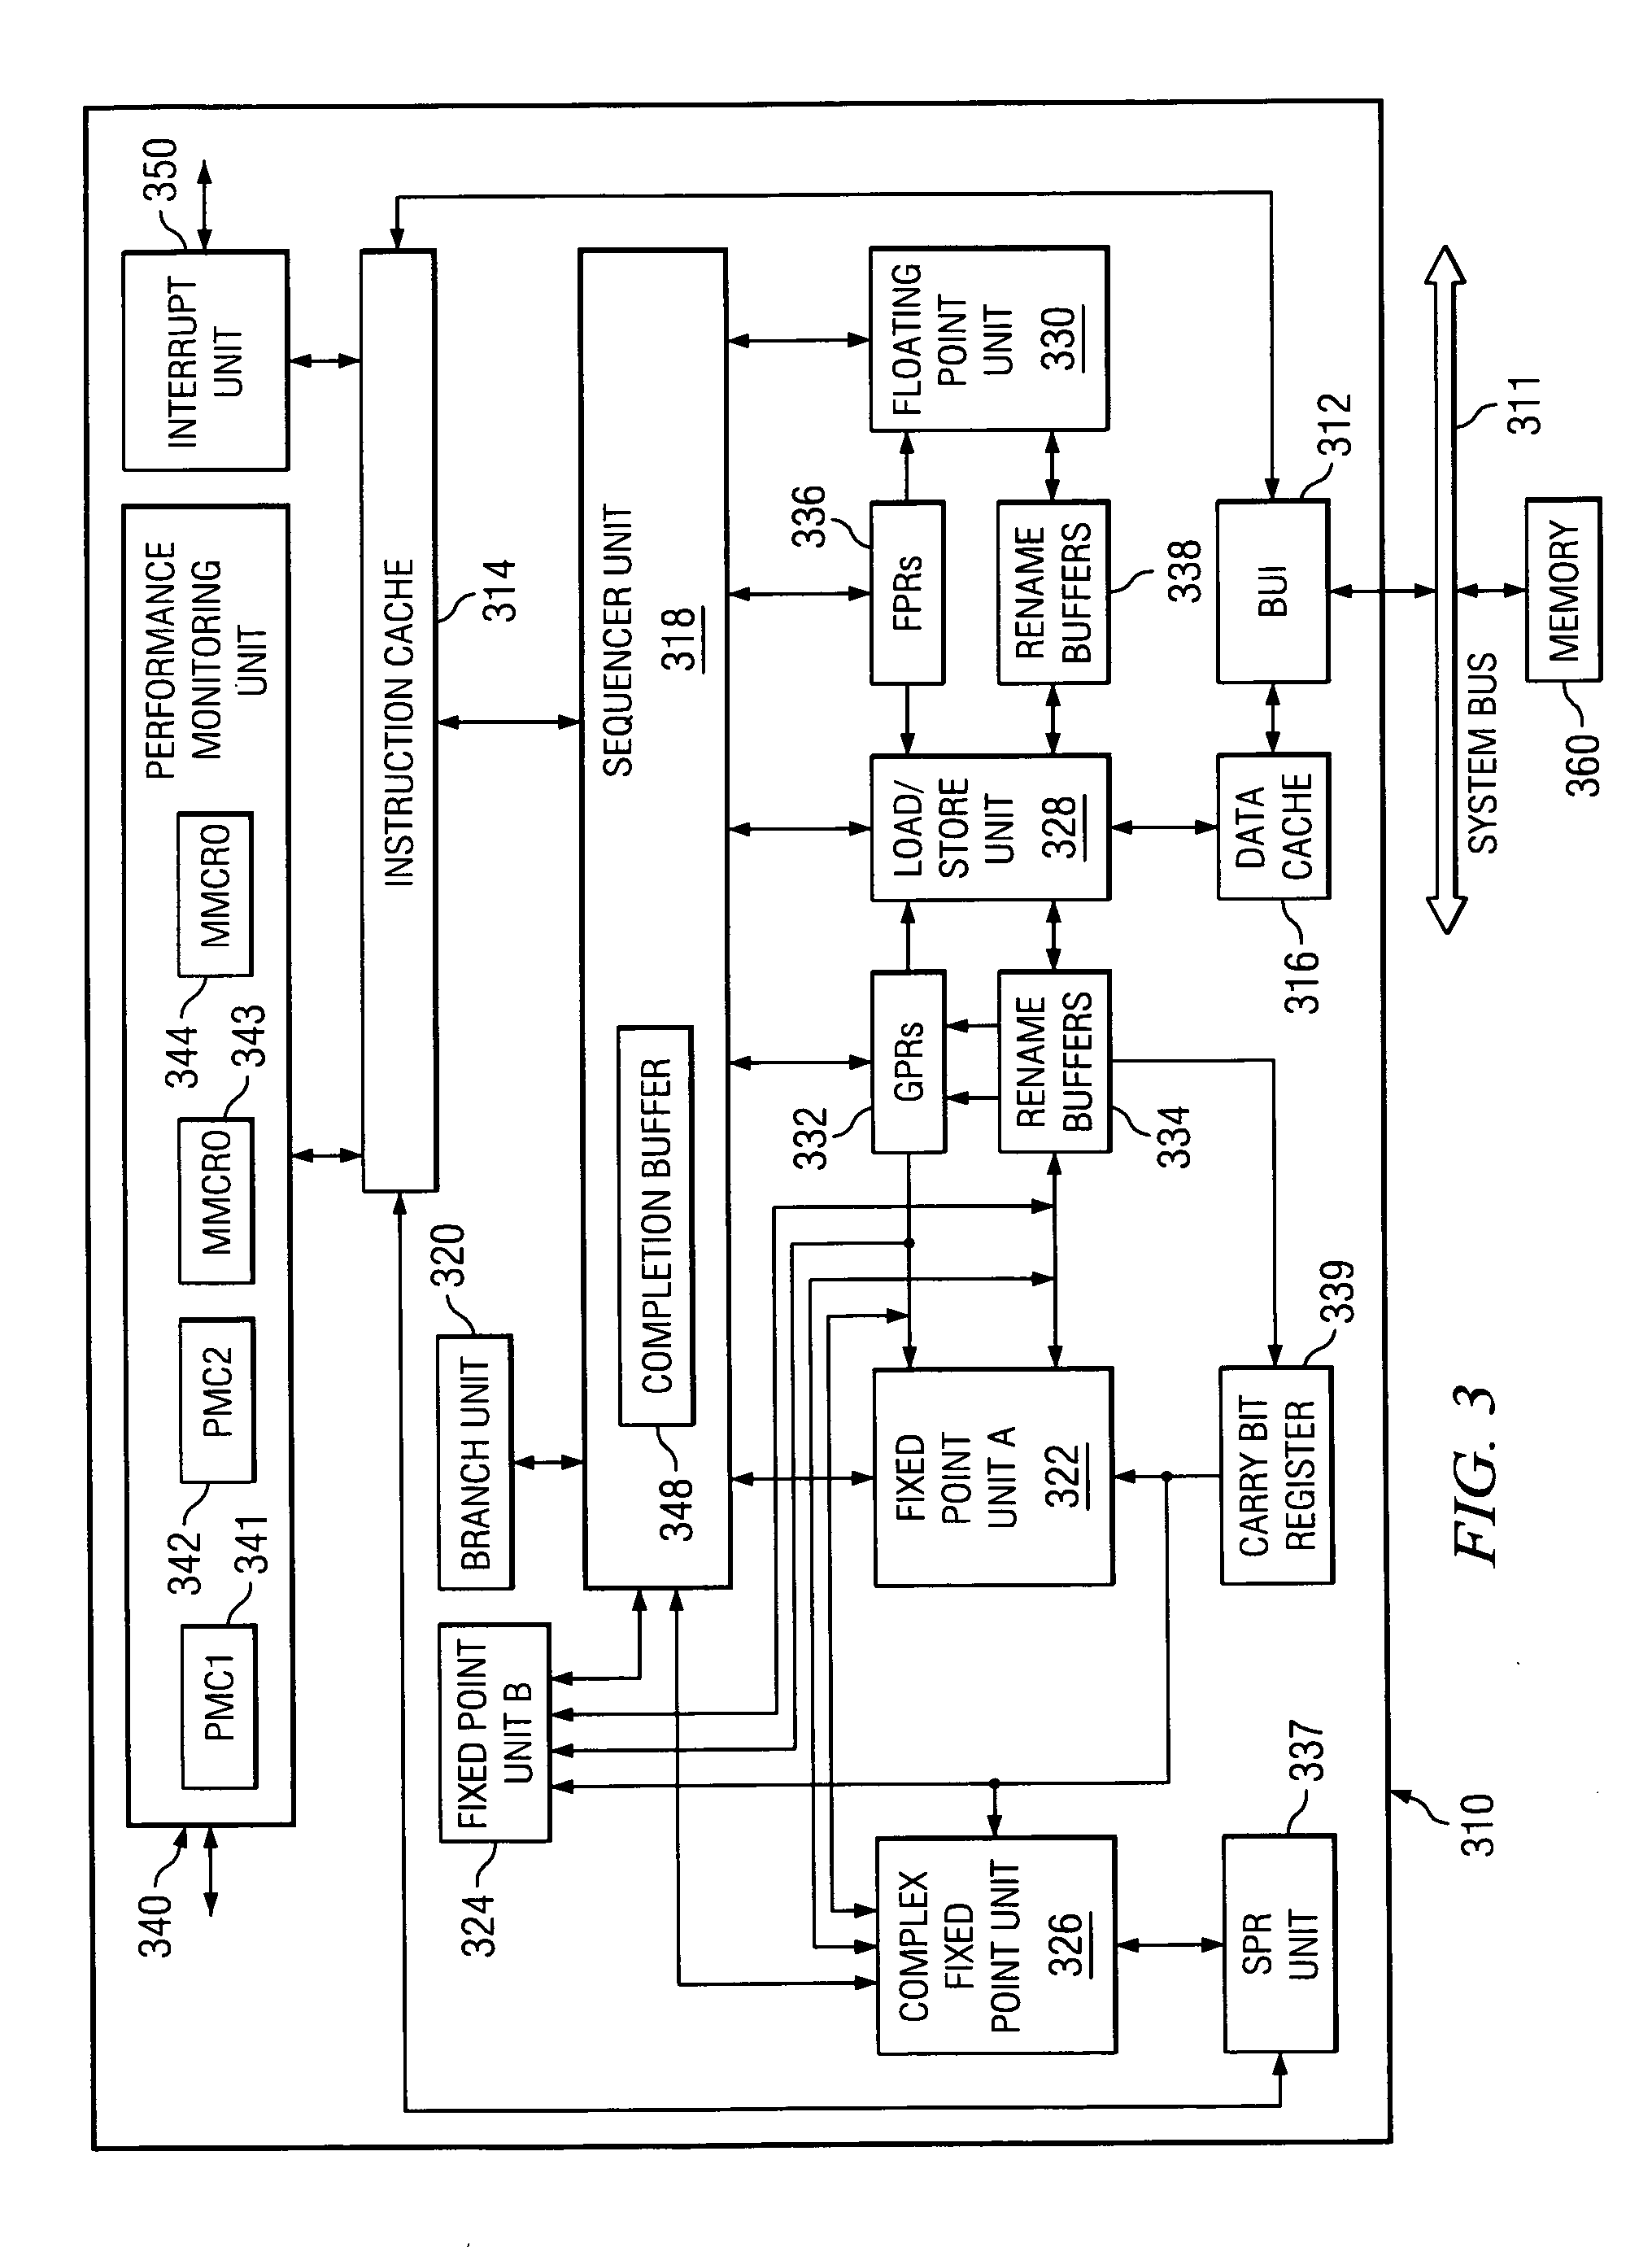 Job level control of simultaneous multi-threading functionality in a processor